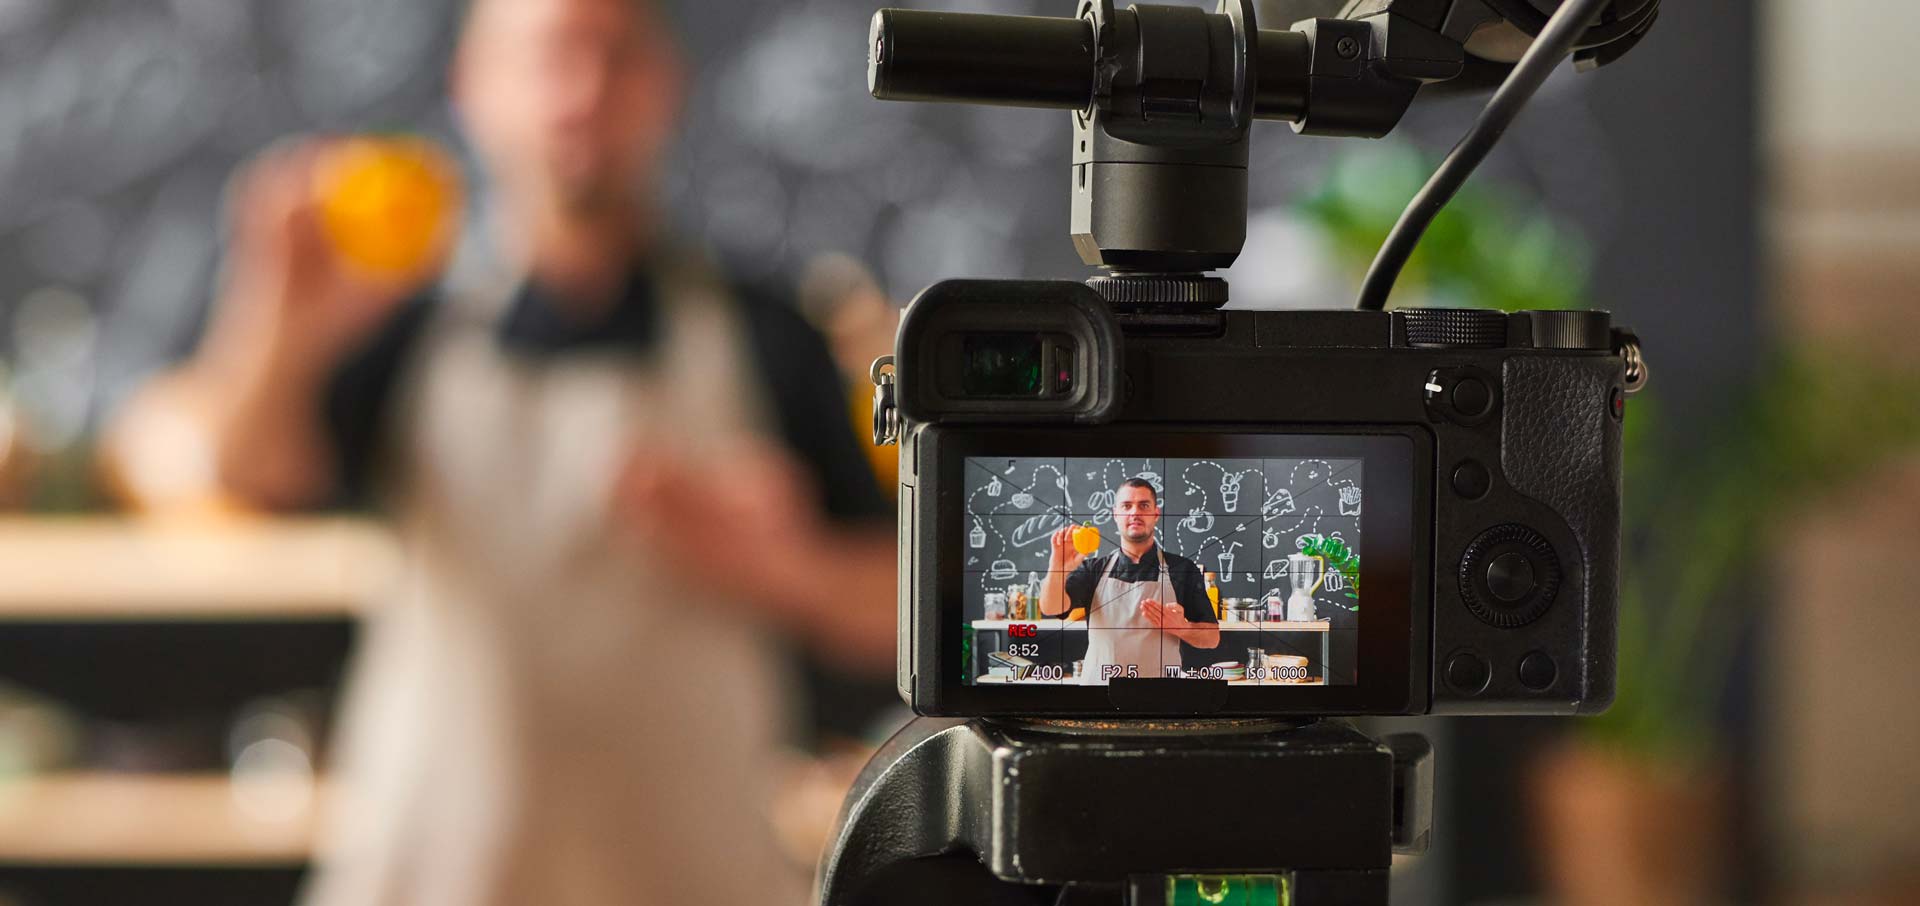 Close up view of video camera filming a chef's demonstration in the distance